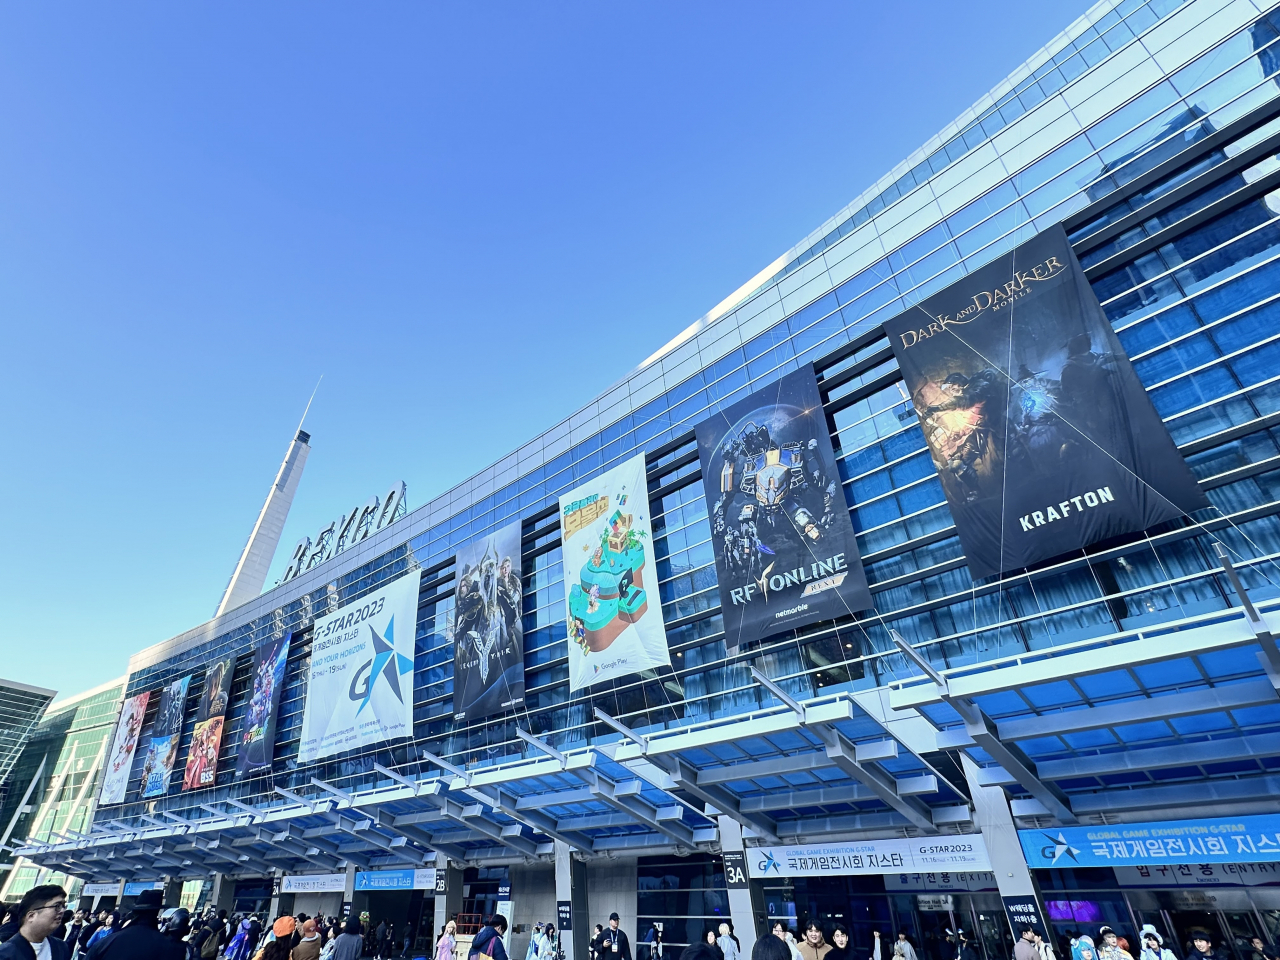 Busan Exhibition and Convention Center plays host to game enthusiasts on the opening day of G-Star 2023, Korea's premiere gaming expo, last Thursday. (Moon Joon Hyun / The Korea Herald)